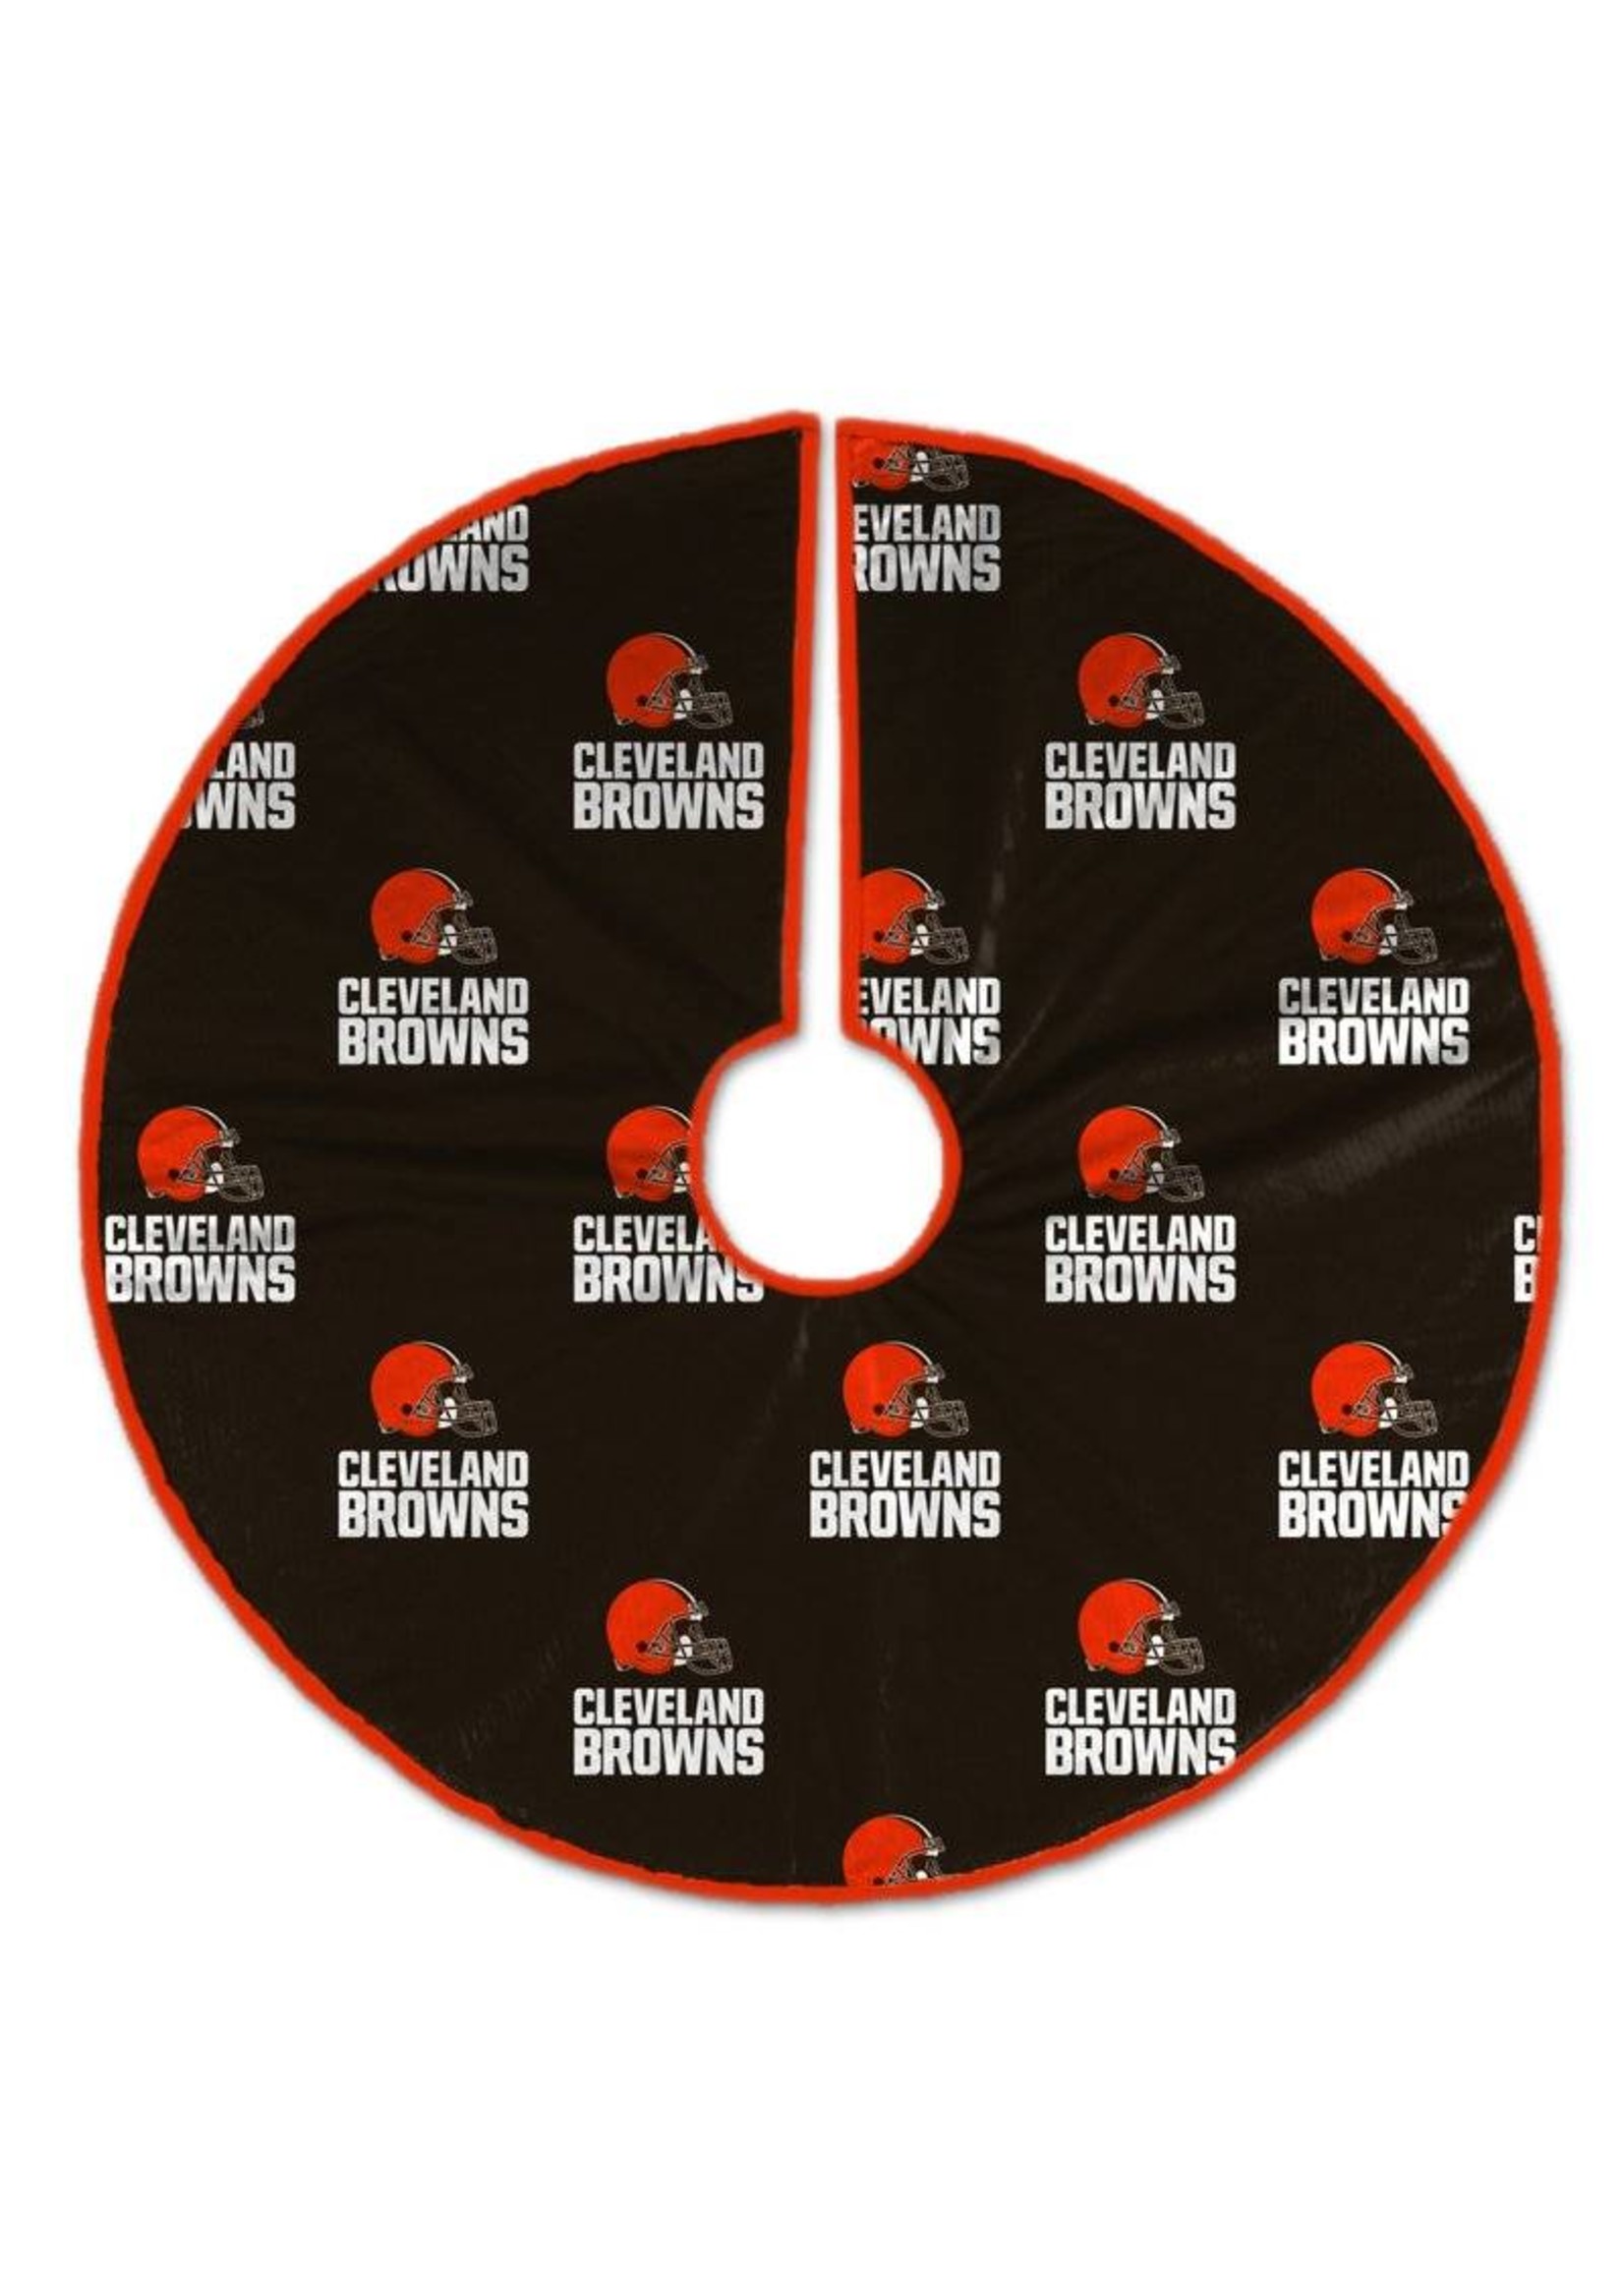 Cleveland Browns Tree Skirt